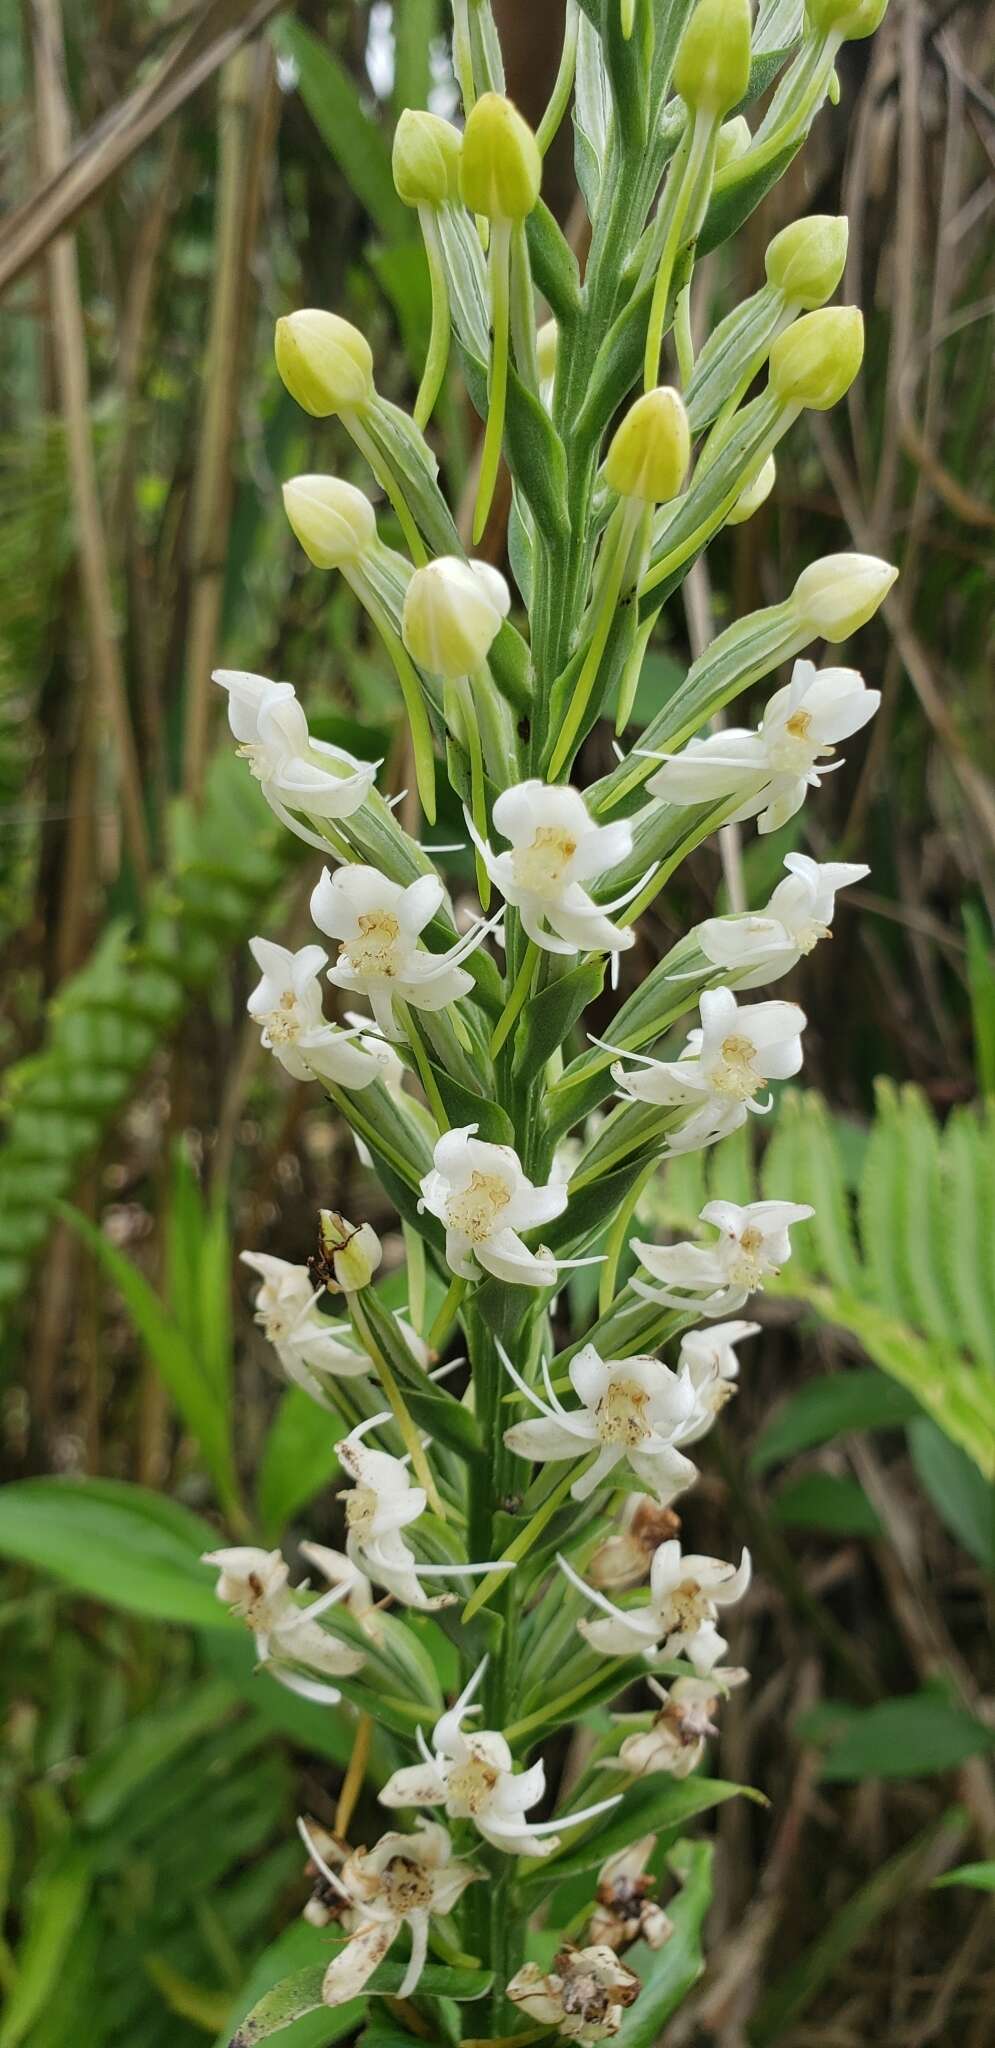 Image of Tropical False Rein Orchid